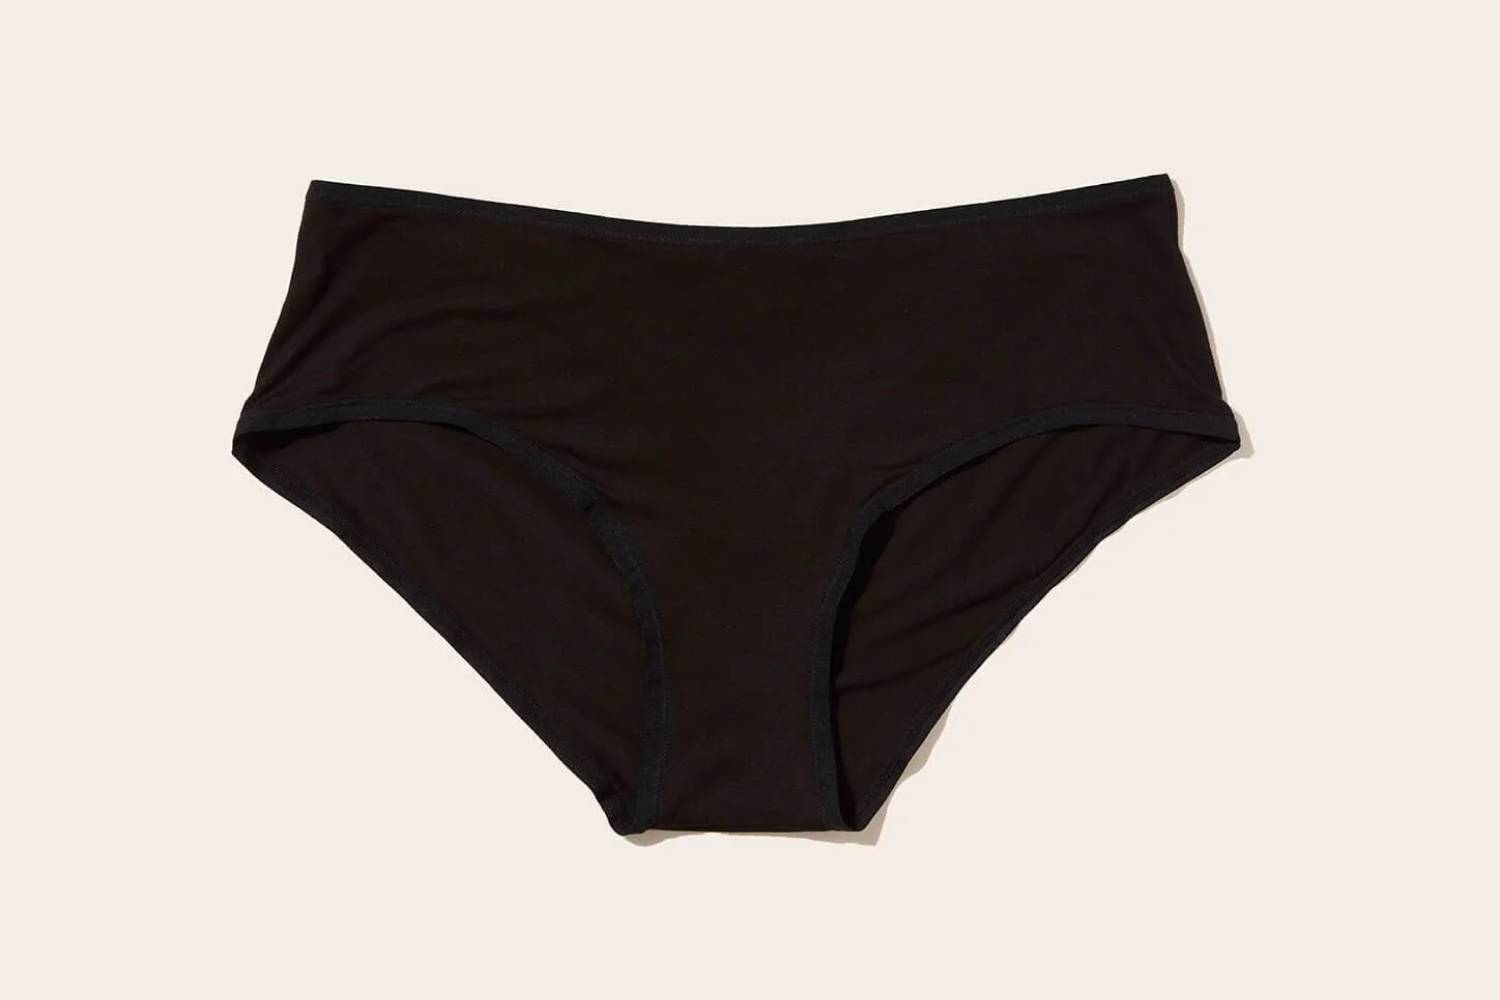 Exploring the Different Types of Women's Panties and Their